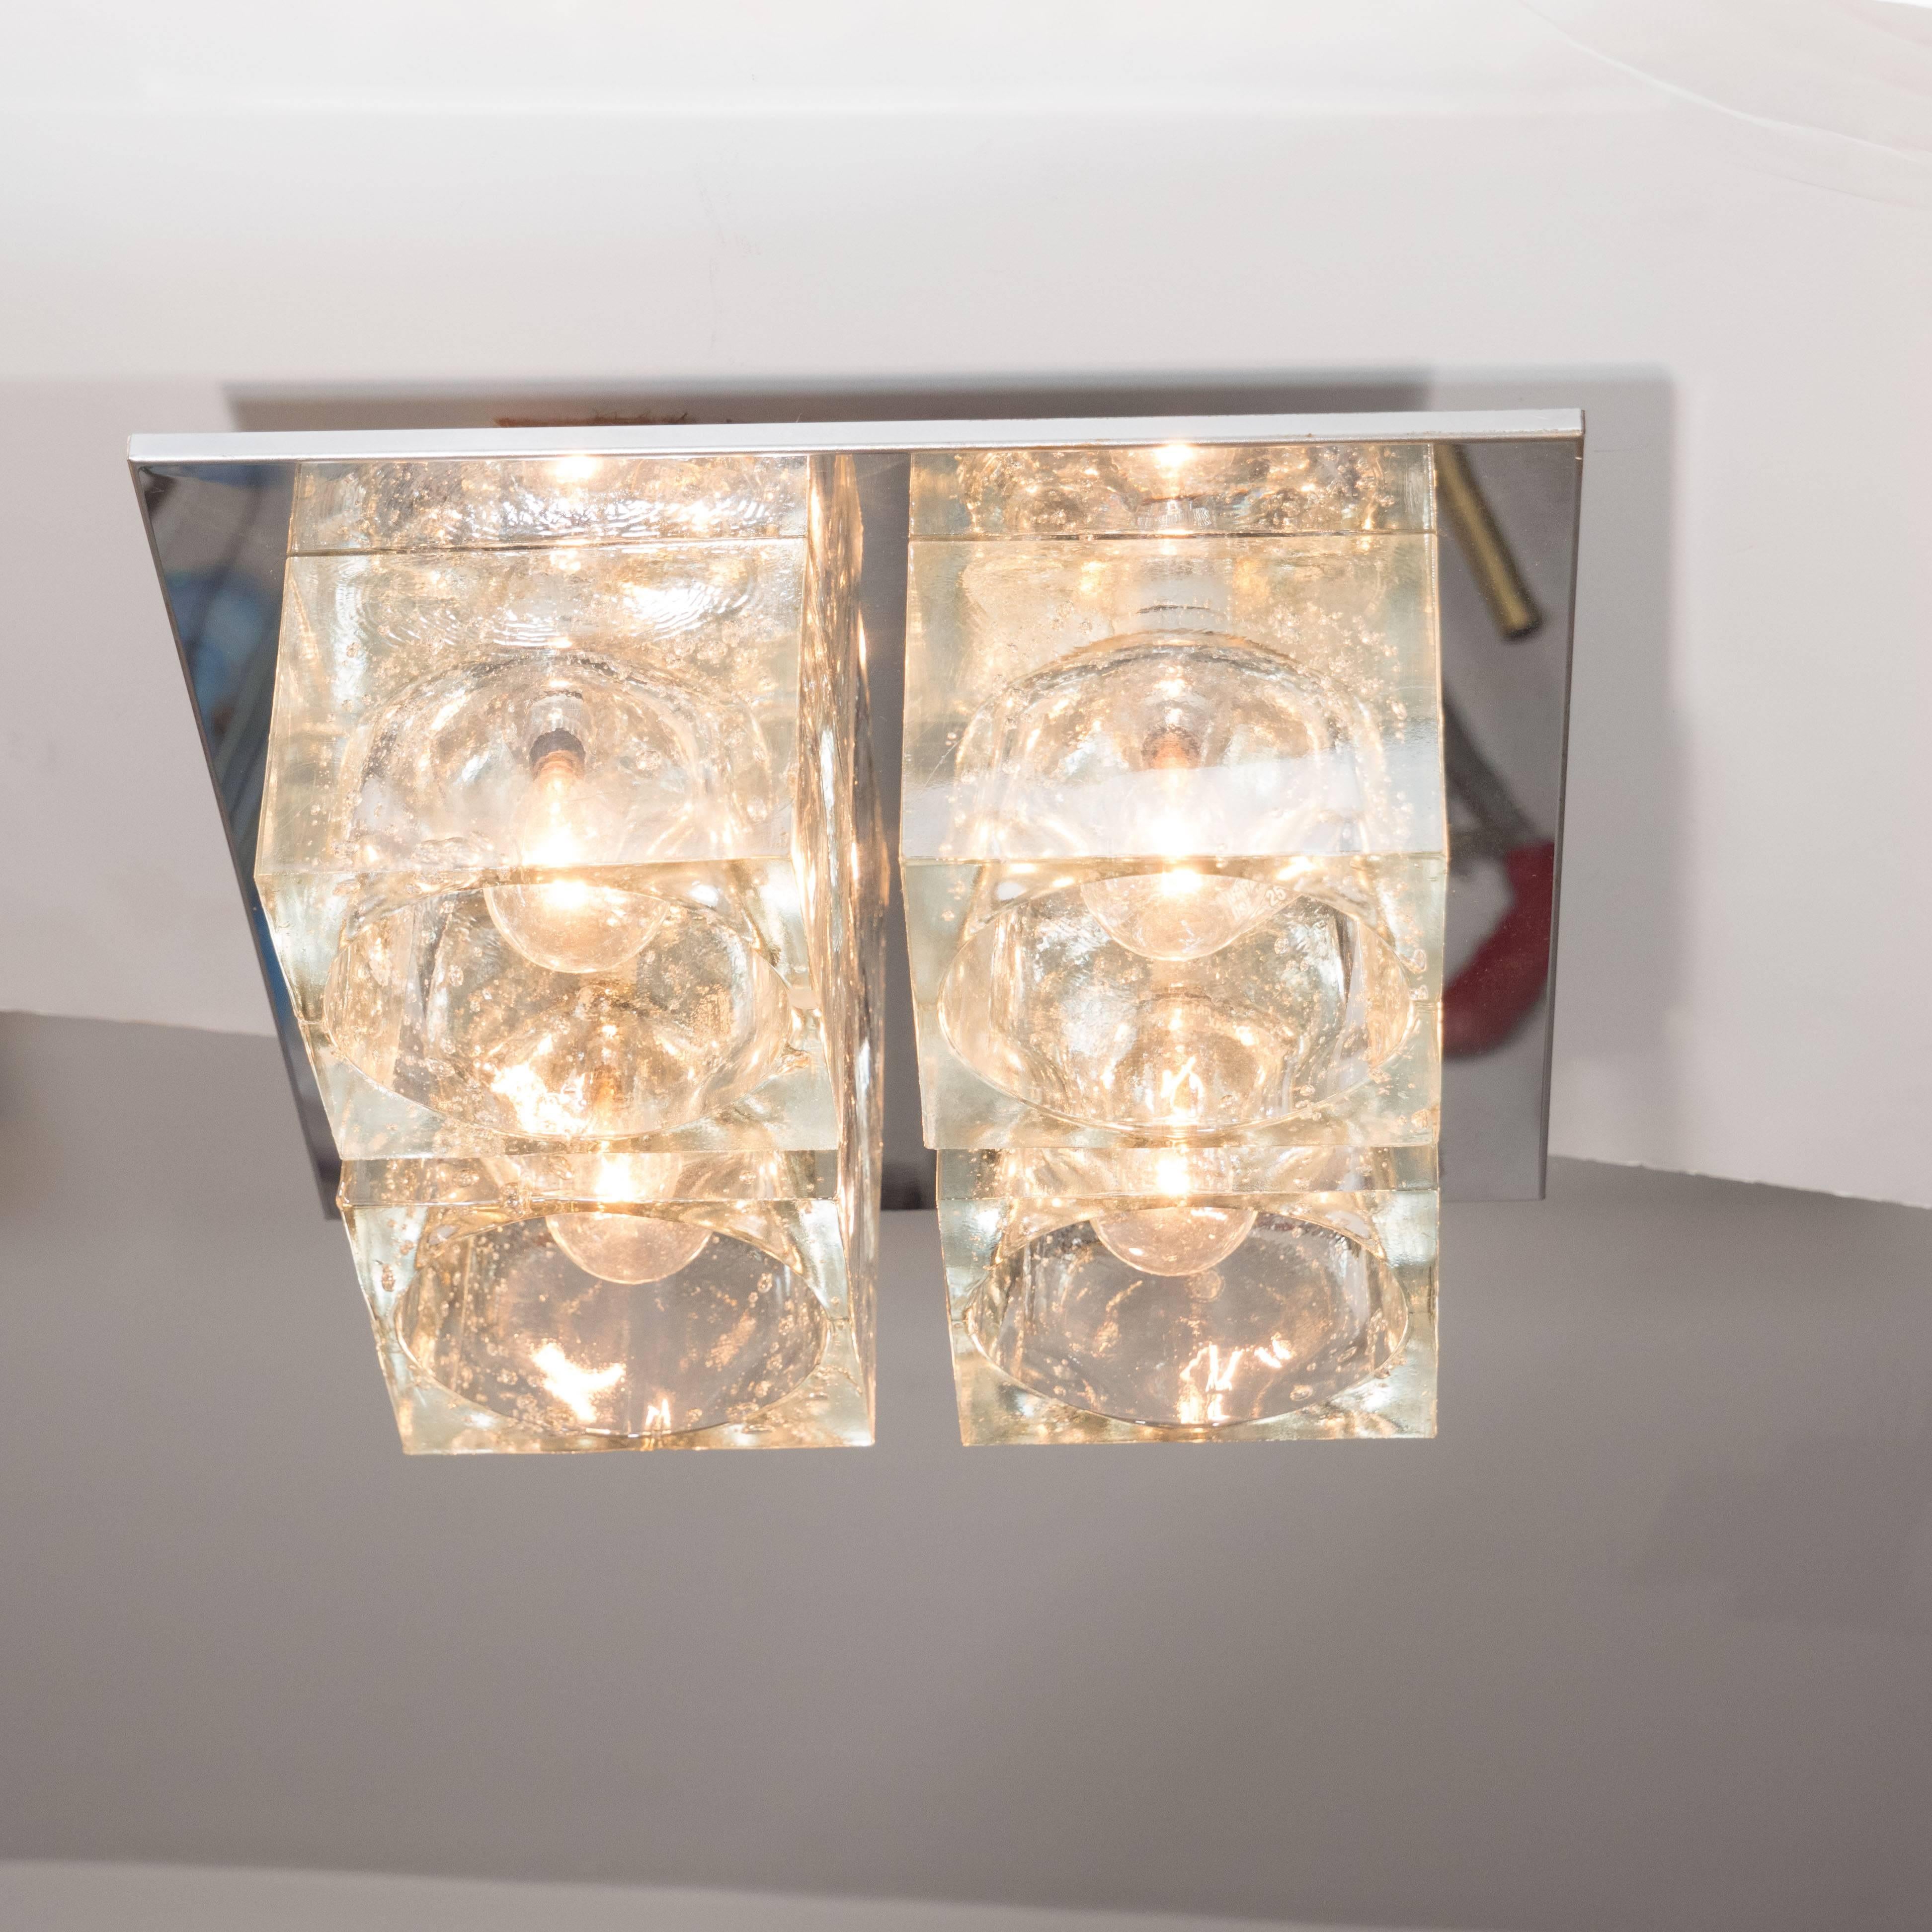 This brilliant Mid-Century Modern flush mount chandelier was realized by the esteemed Italian glass studio Sciolari, circa 1970. It features four thick translucent glass cubed shades with inset bulbs attached to a close fitting chrome backplate.